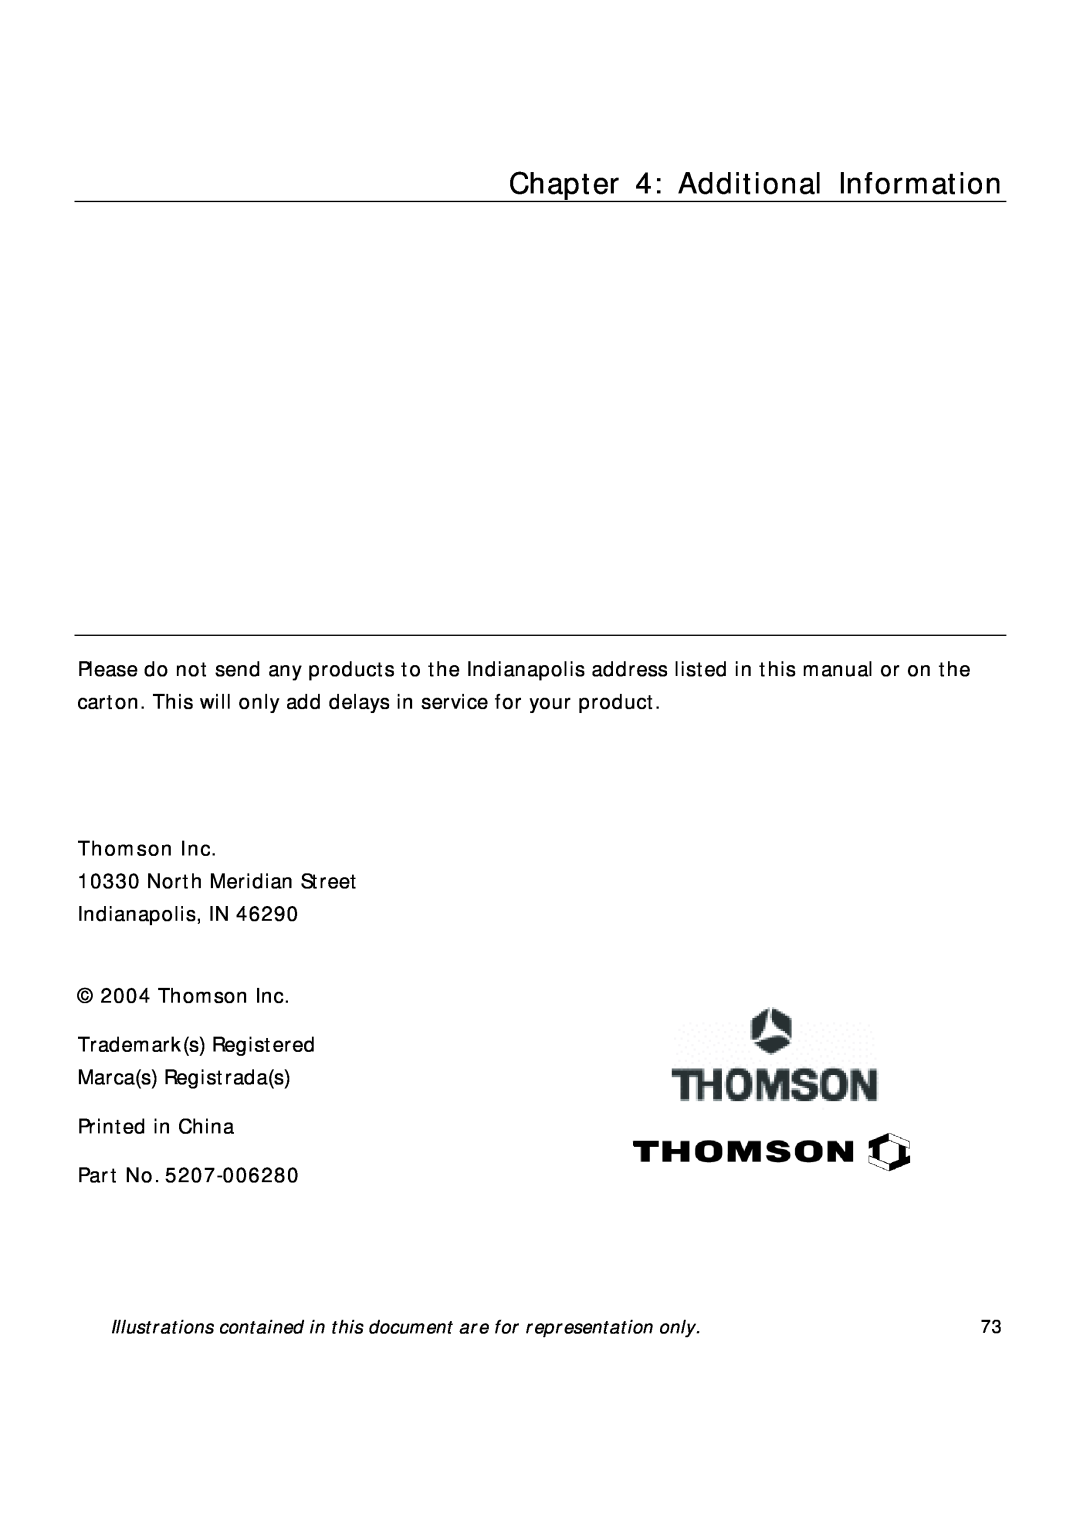 Technicolor - Thomson TCW710 manual Additional Information, North Meridian Street Indianapolis, IN 2004 Thomson Inc 